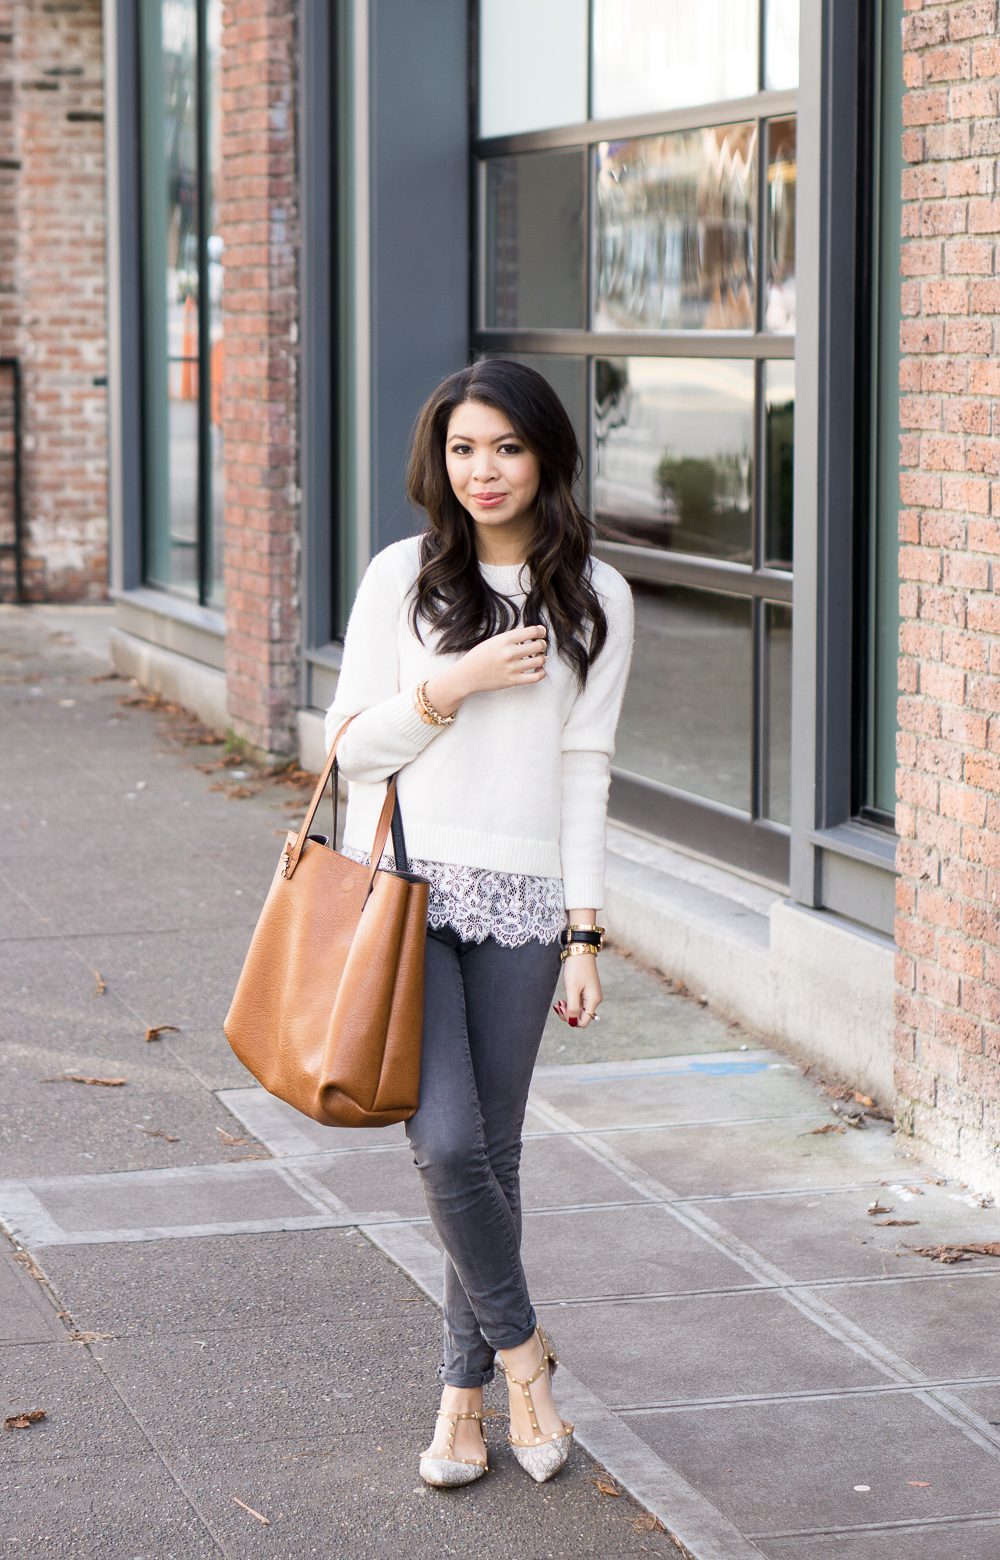 15 Girlish Ways To Wear A Sweater With Lace - Styleoholic